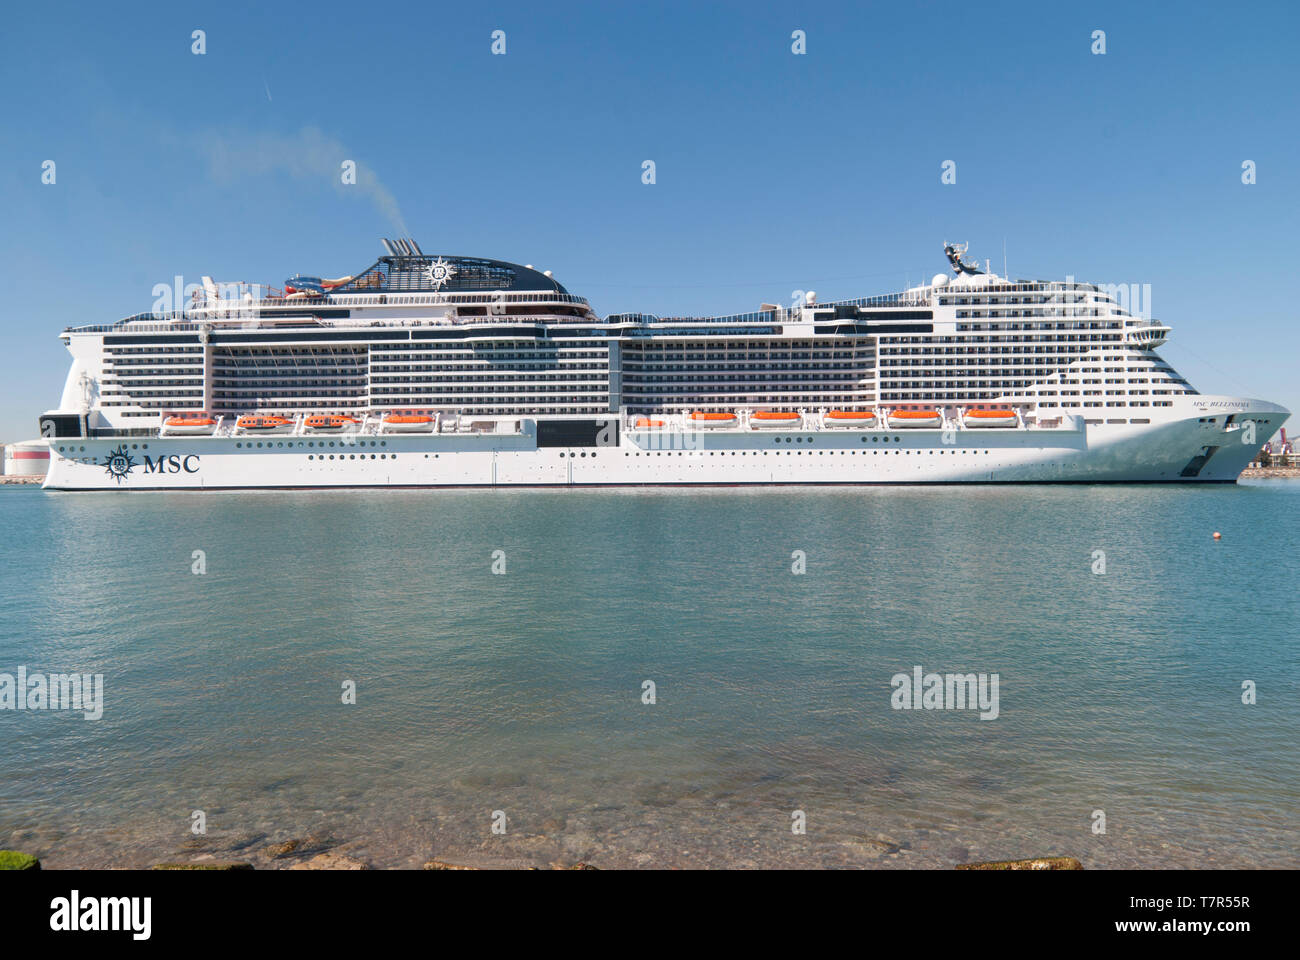 MSC Bellissima cruise ship of the MSC Cruises company entering at the